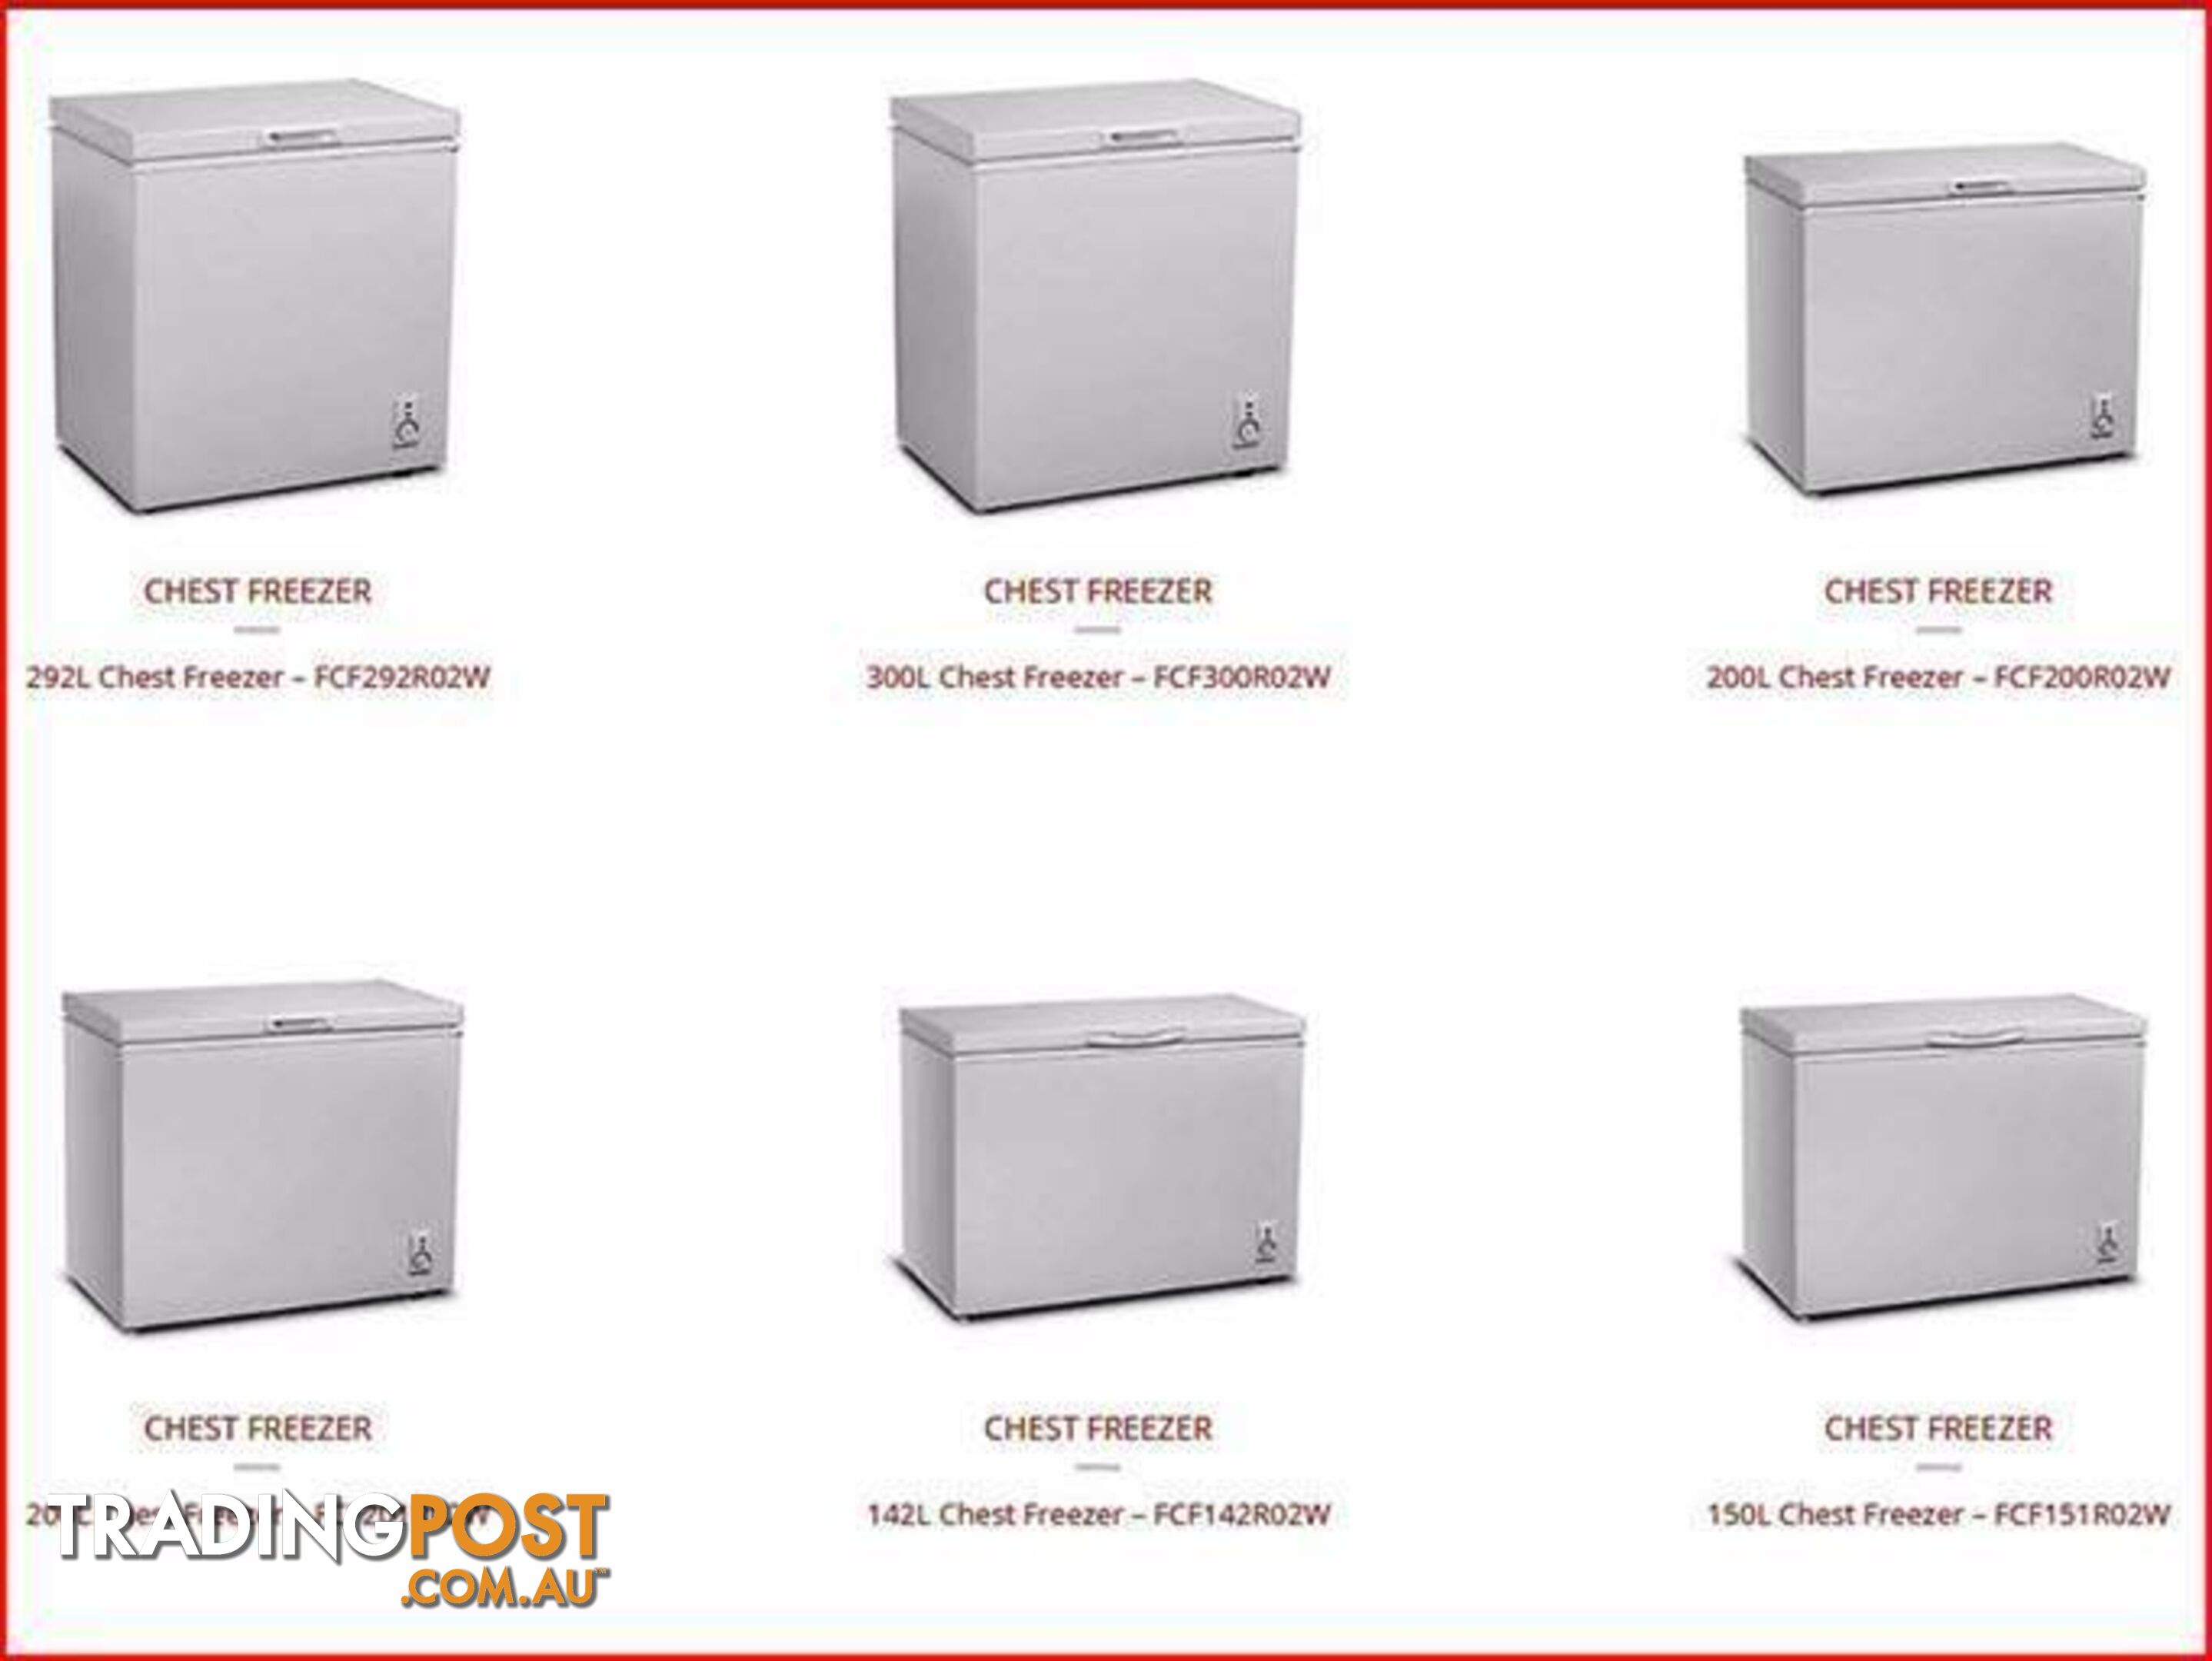 Freezer Chest New 200Ltr. 8 YEAR WARRANTY. ALL SIZES AVAILABLE.